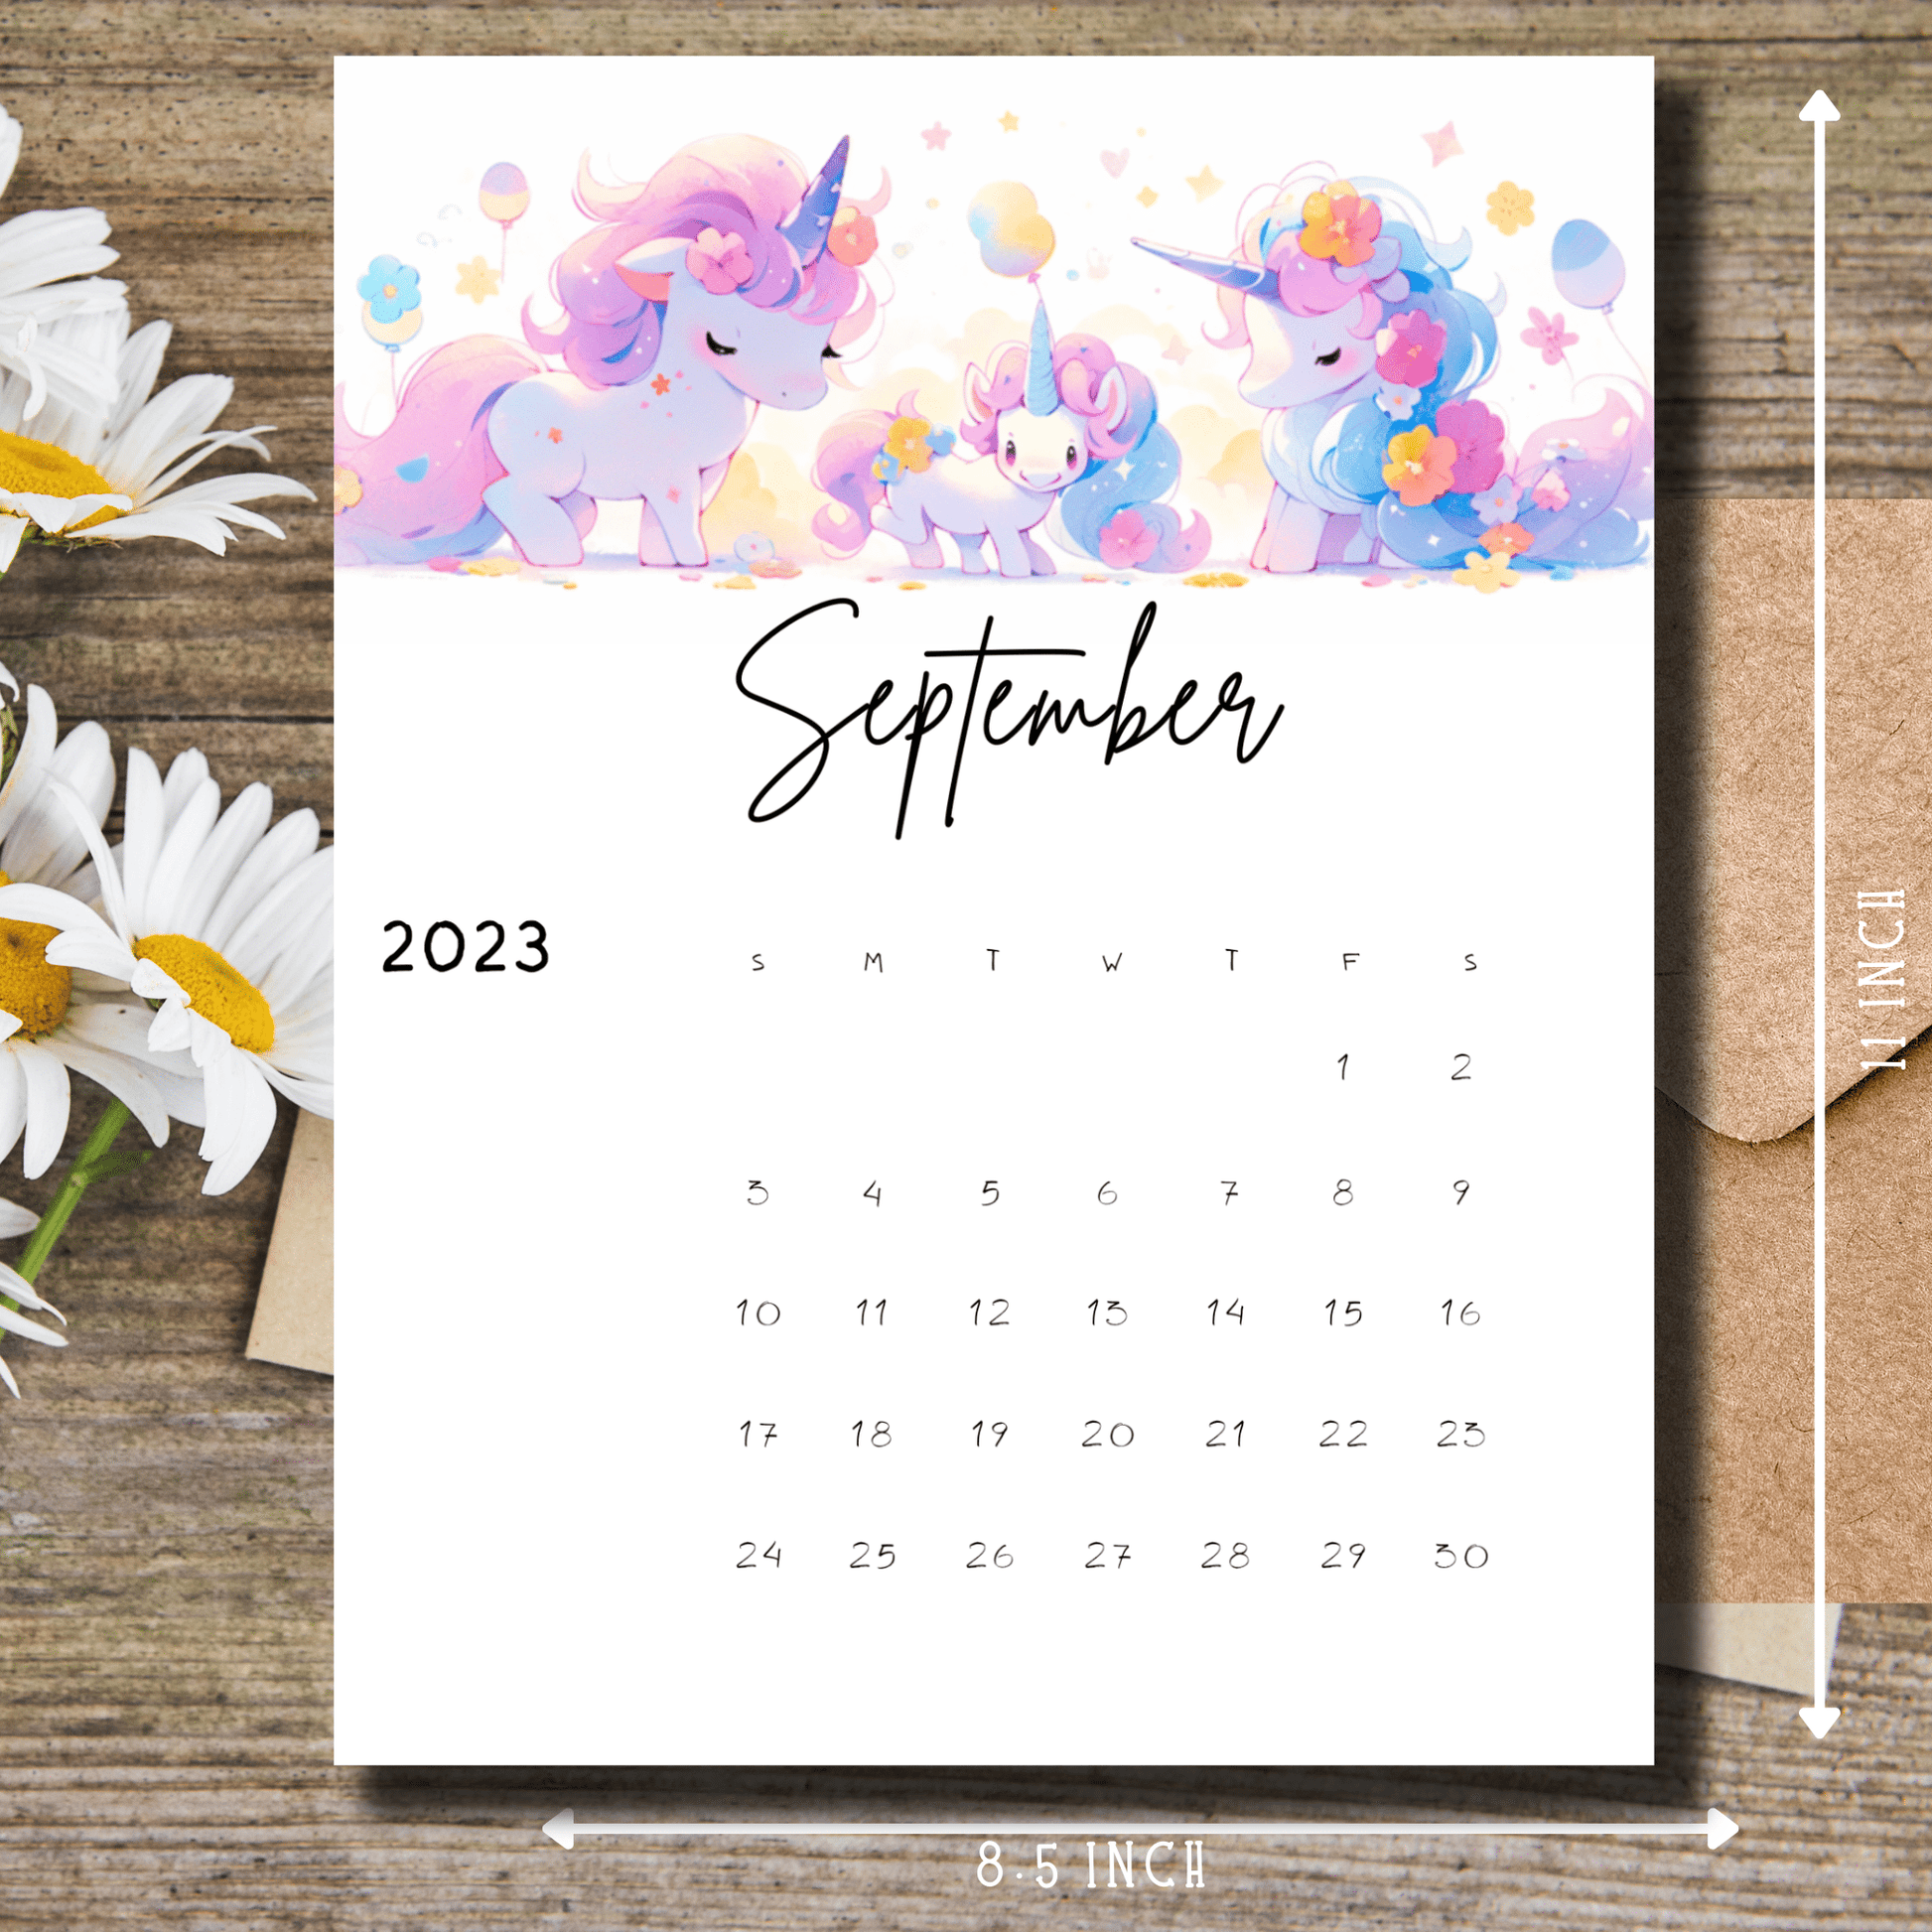 Digital download bullet journal planner with an anime unicorn theme by Sarsari Creations, ideal for September 2023 planning.